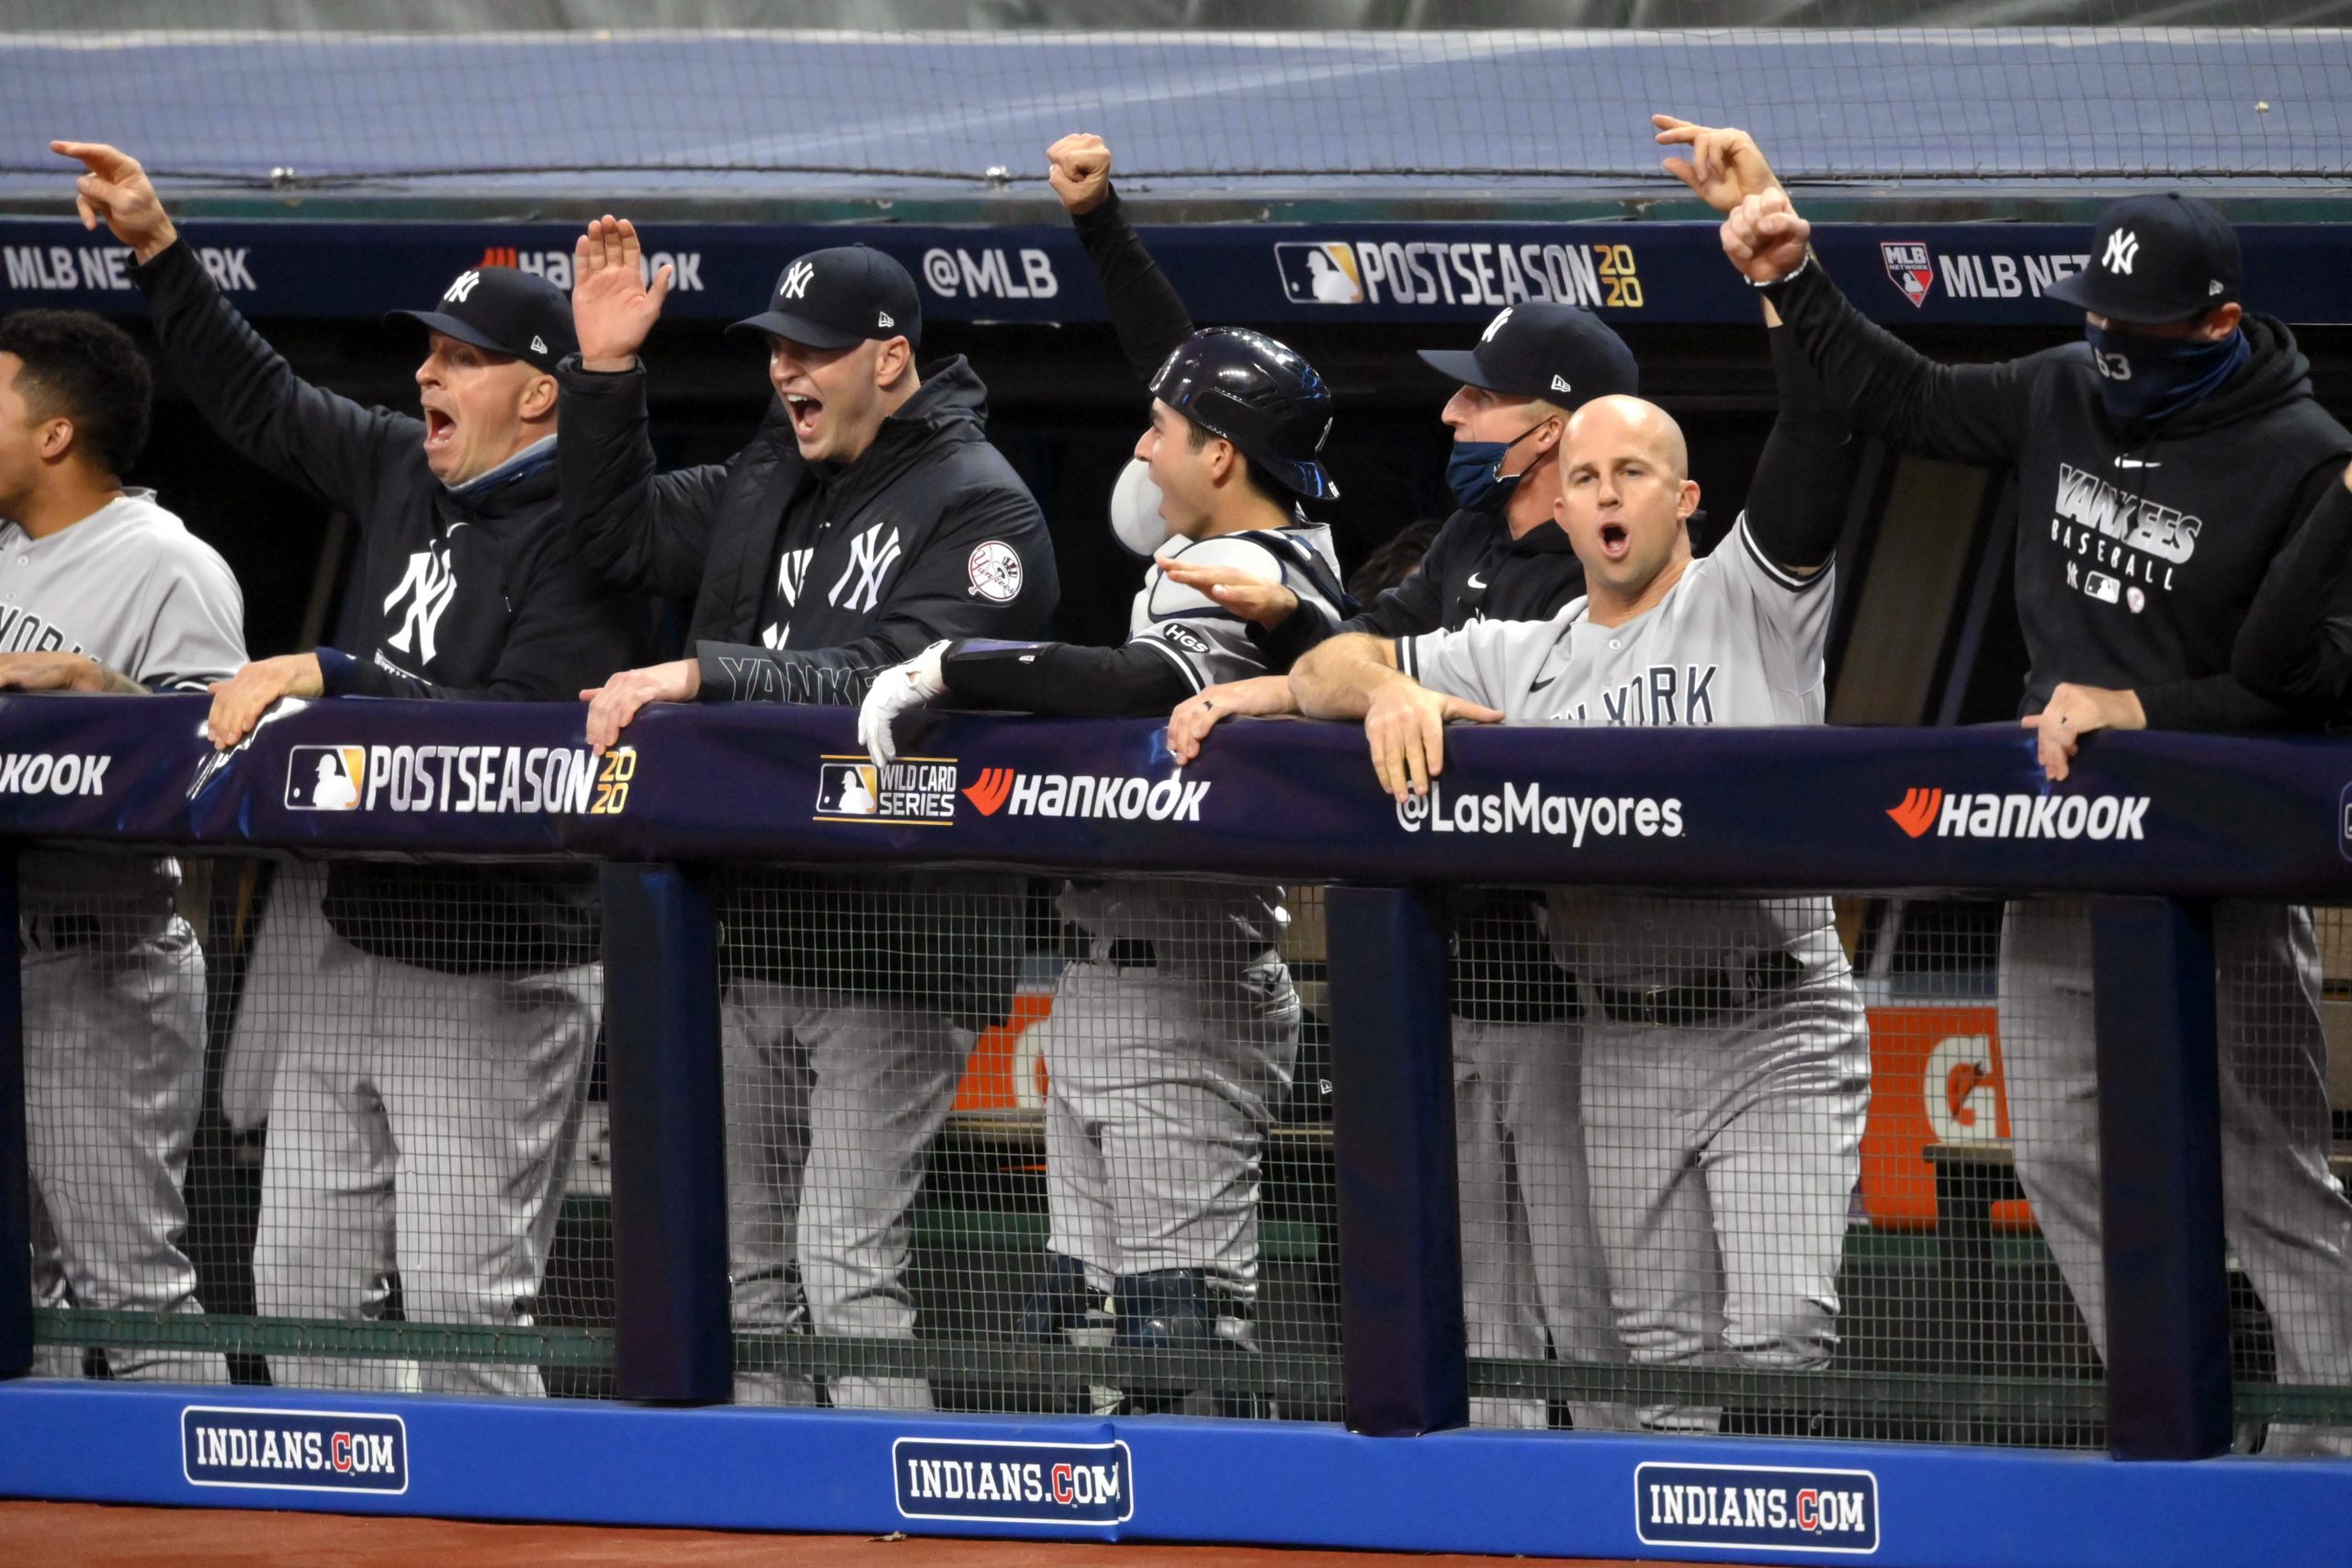 Yankees beat down on Cleveland, take 12-3 blowout win in ...